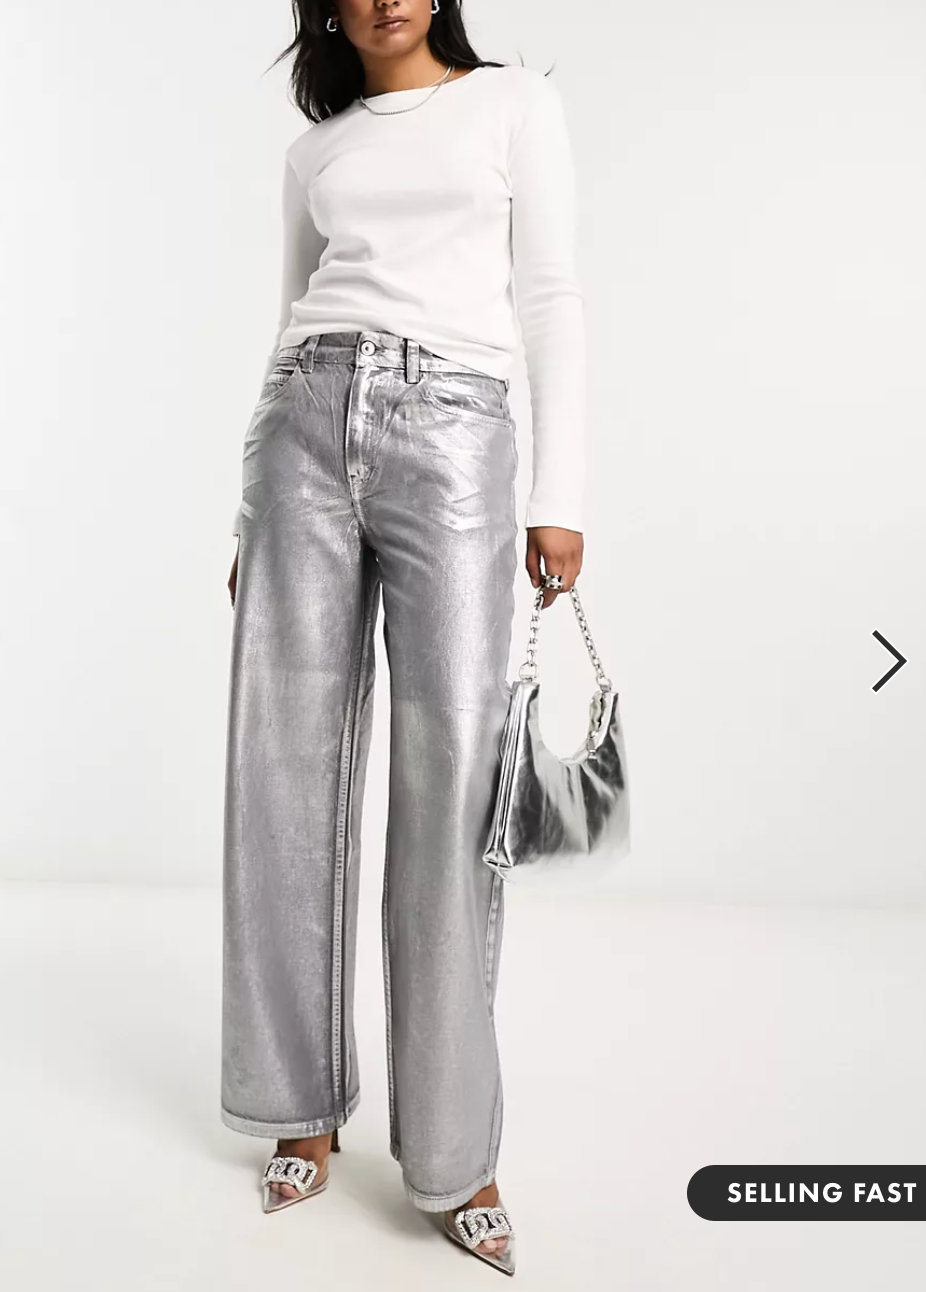 Zara High Waisted Metallic Pants in Pink and Silver – Amazing Mae